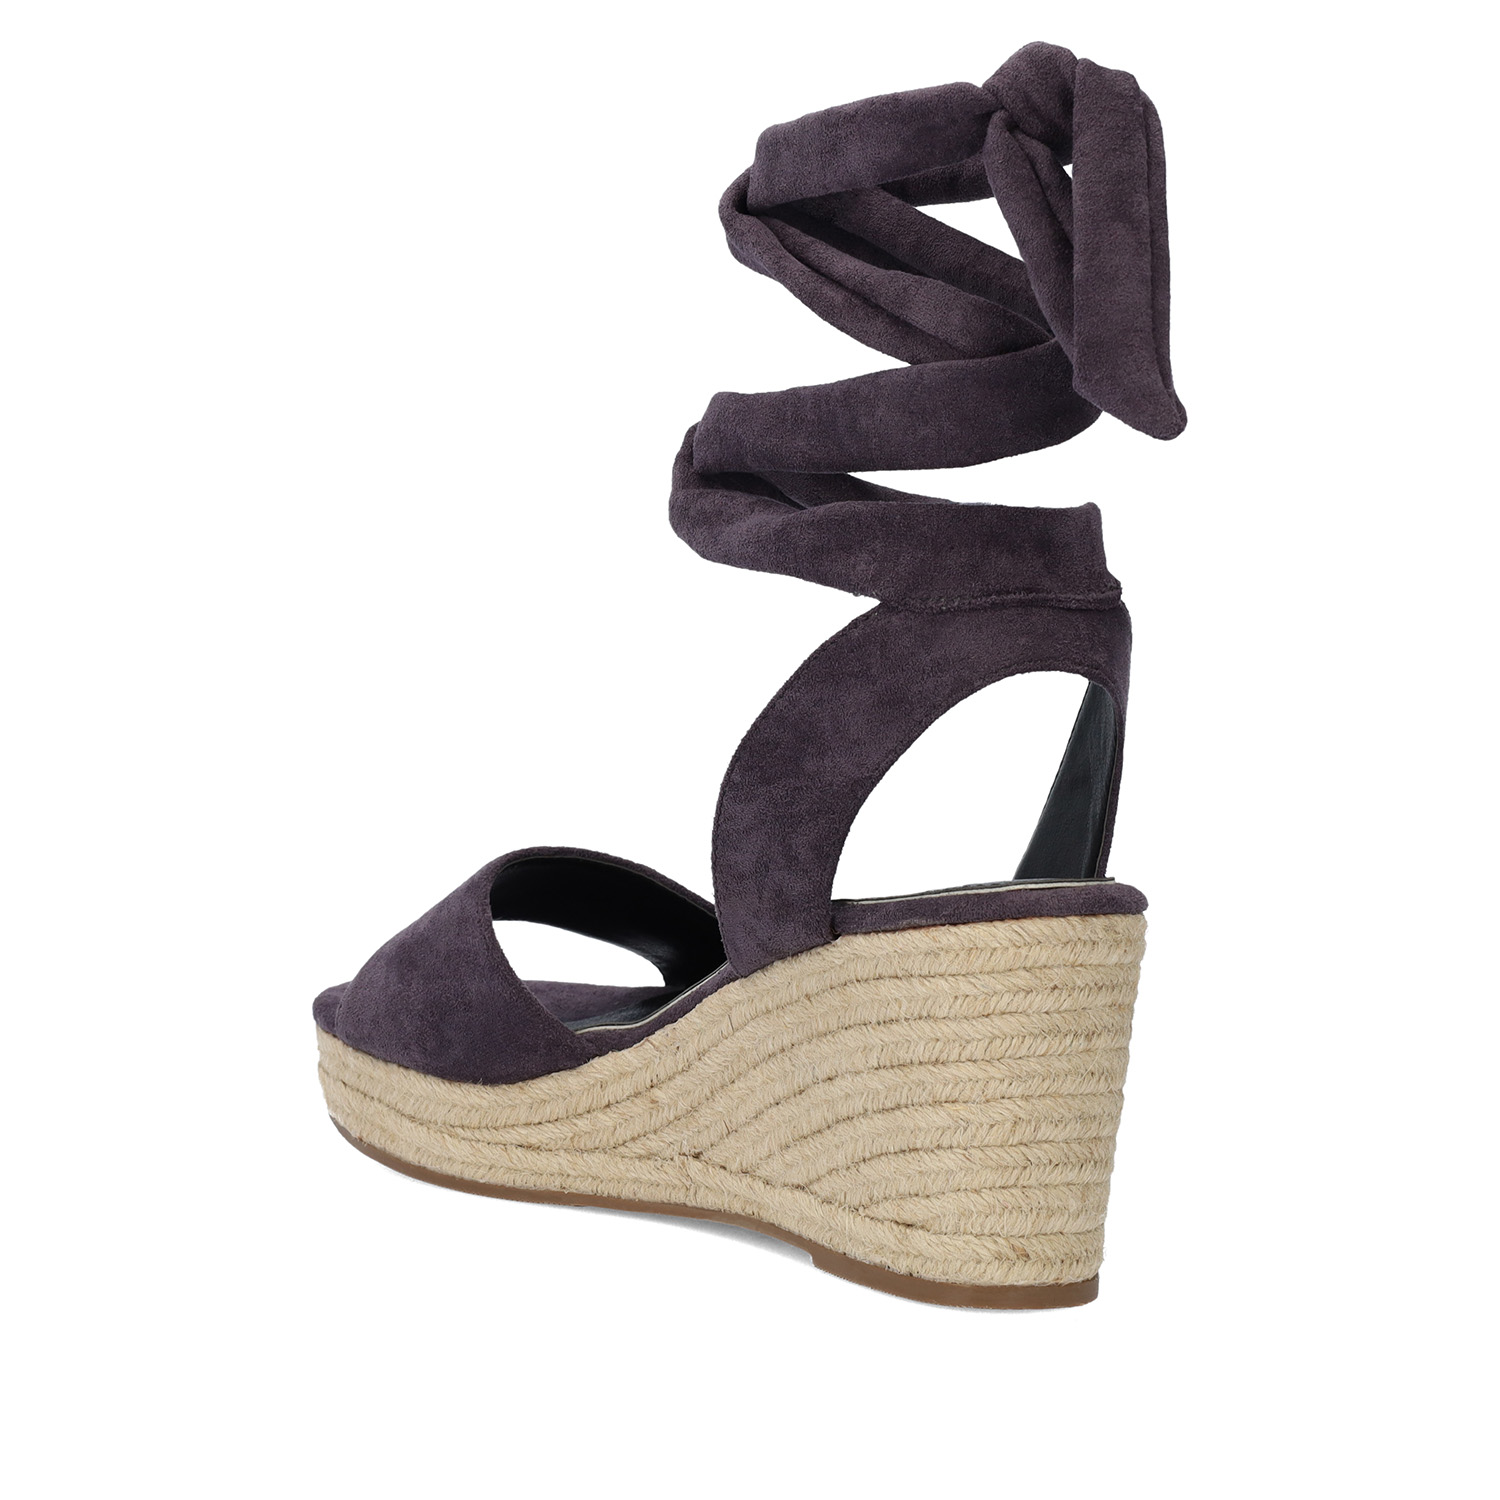 Grey faux suede espadrilles with jute wedge 